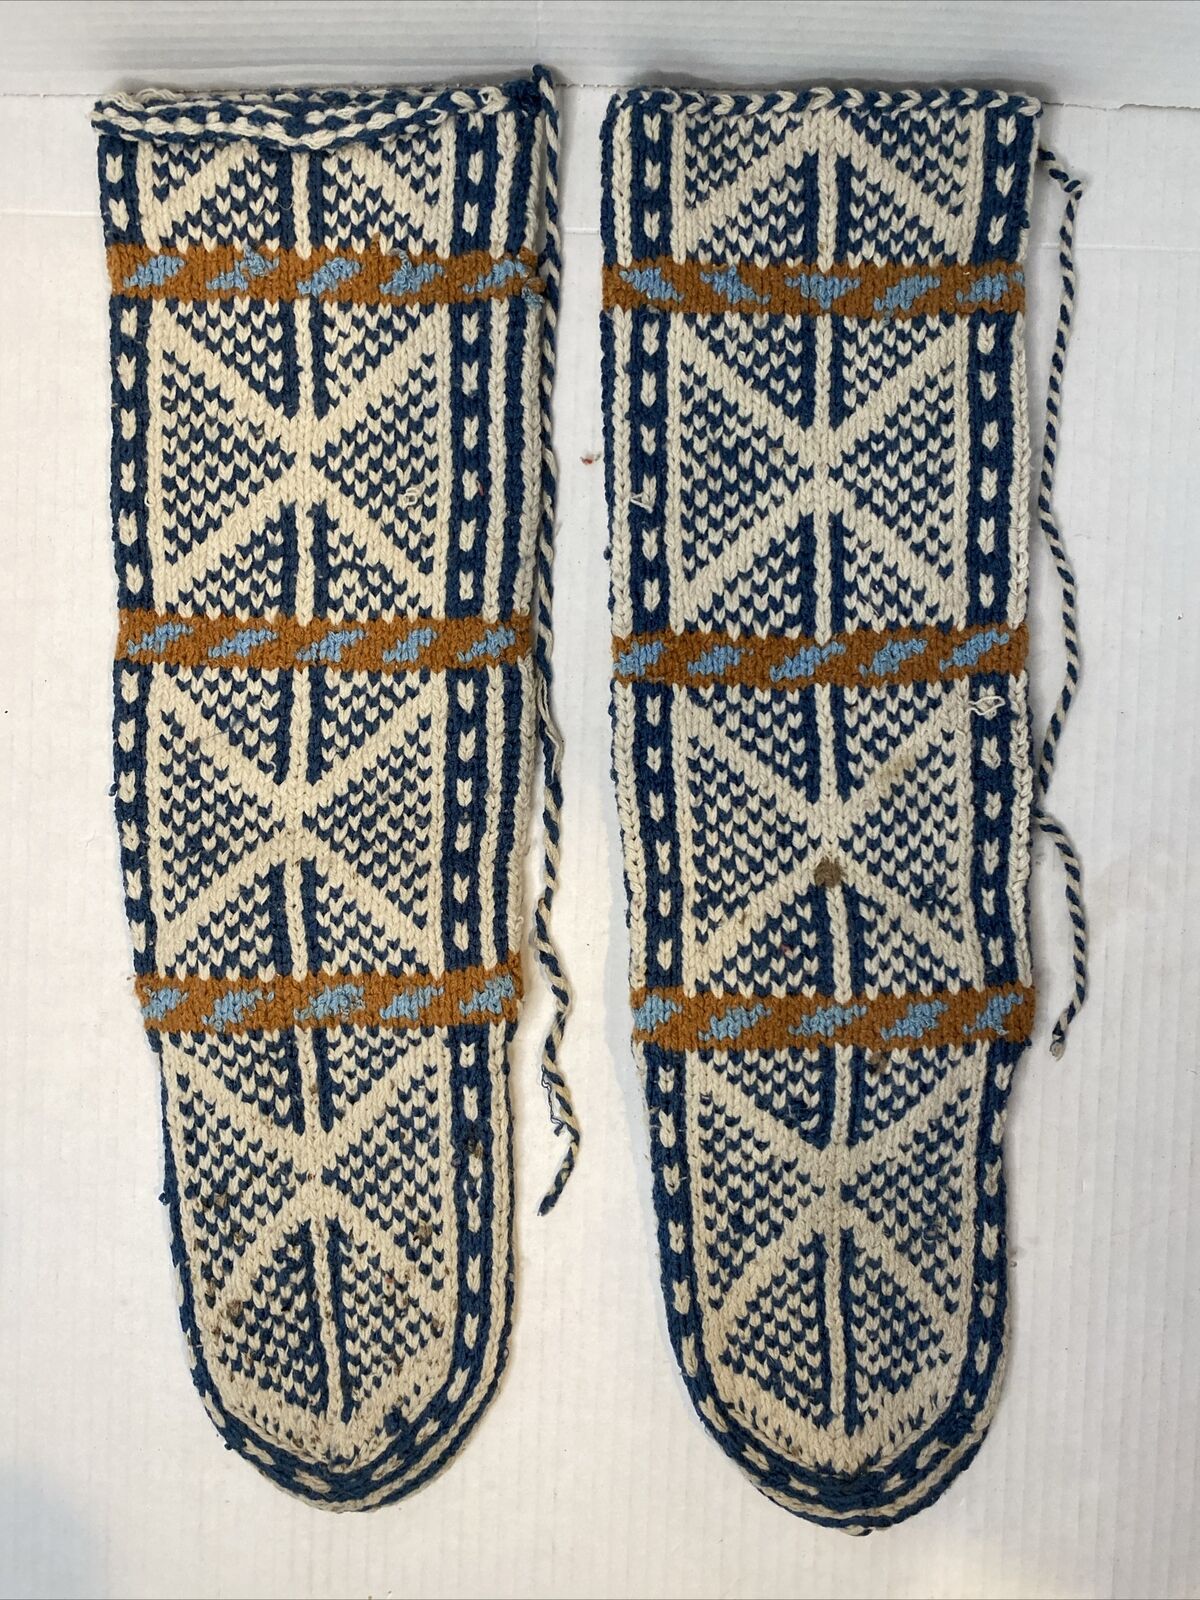 Vintage Knitting/leather Shoes Native American Indian? Shoes